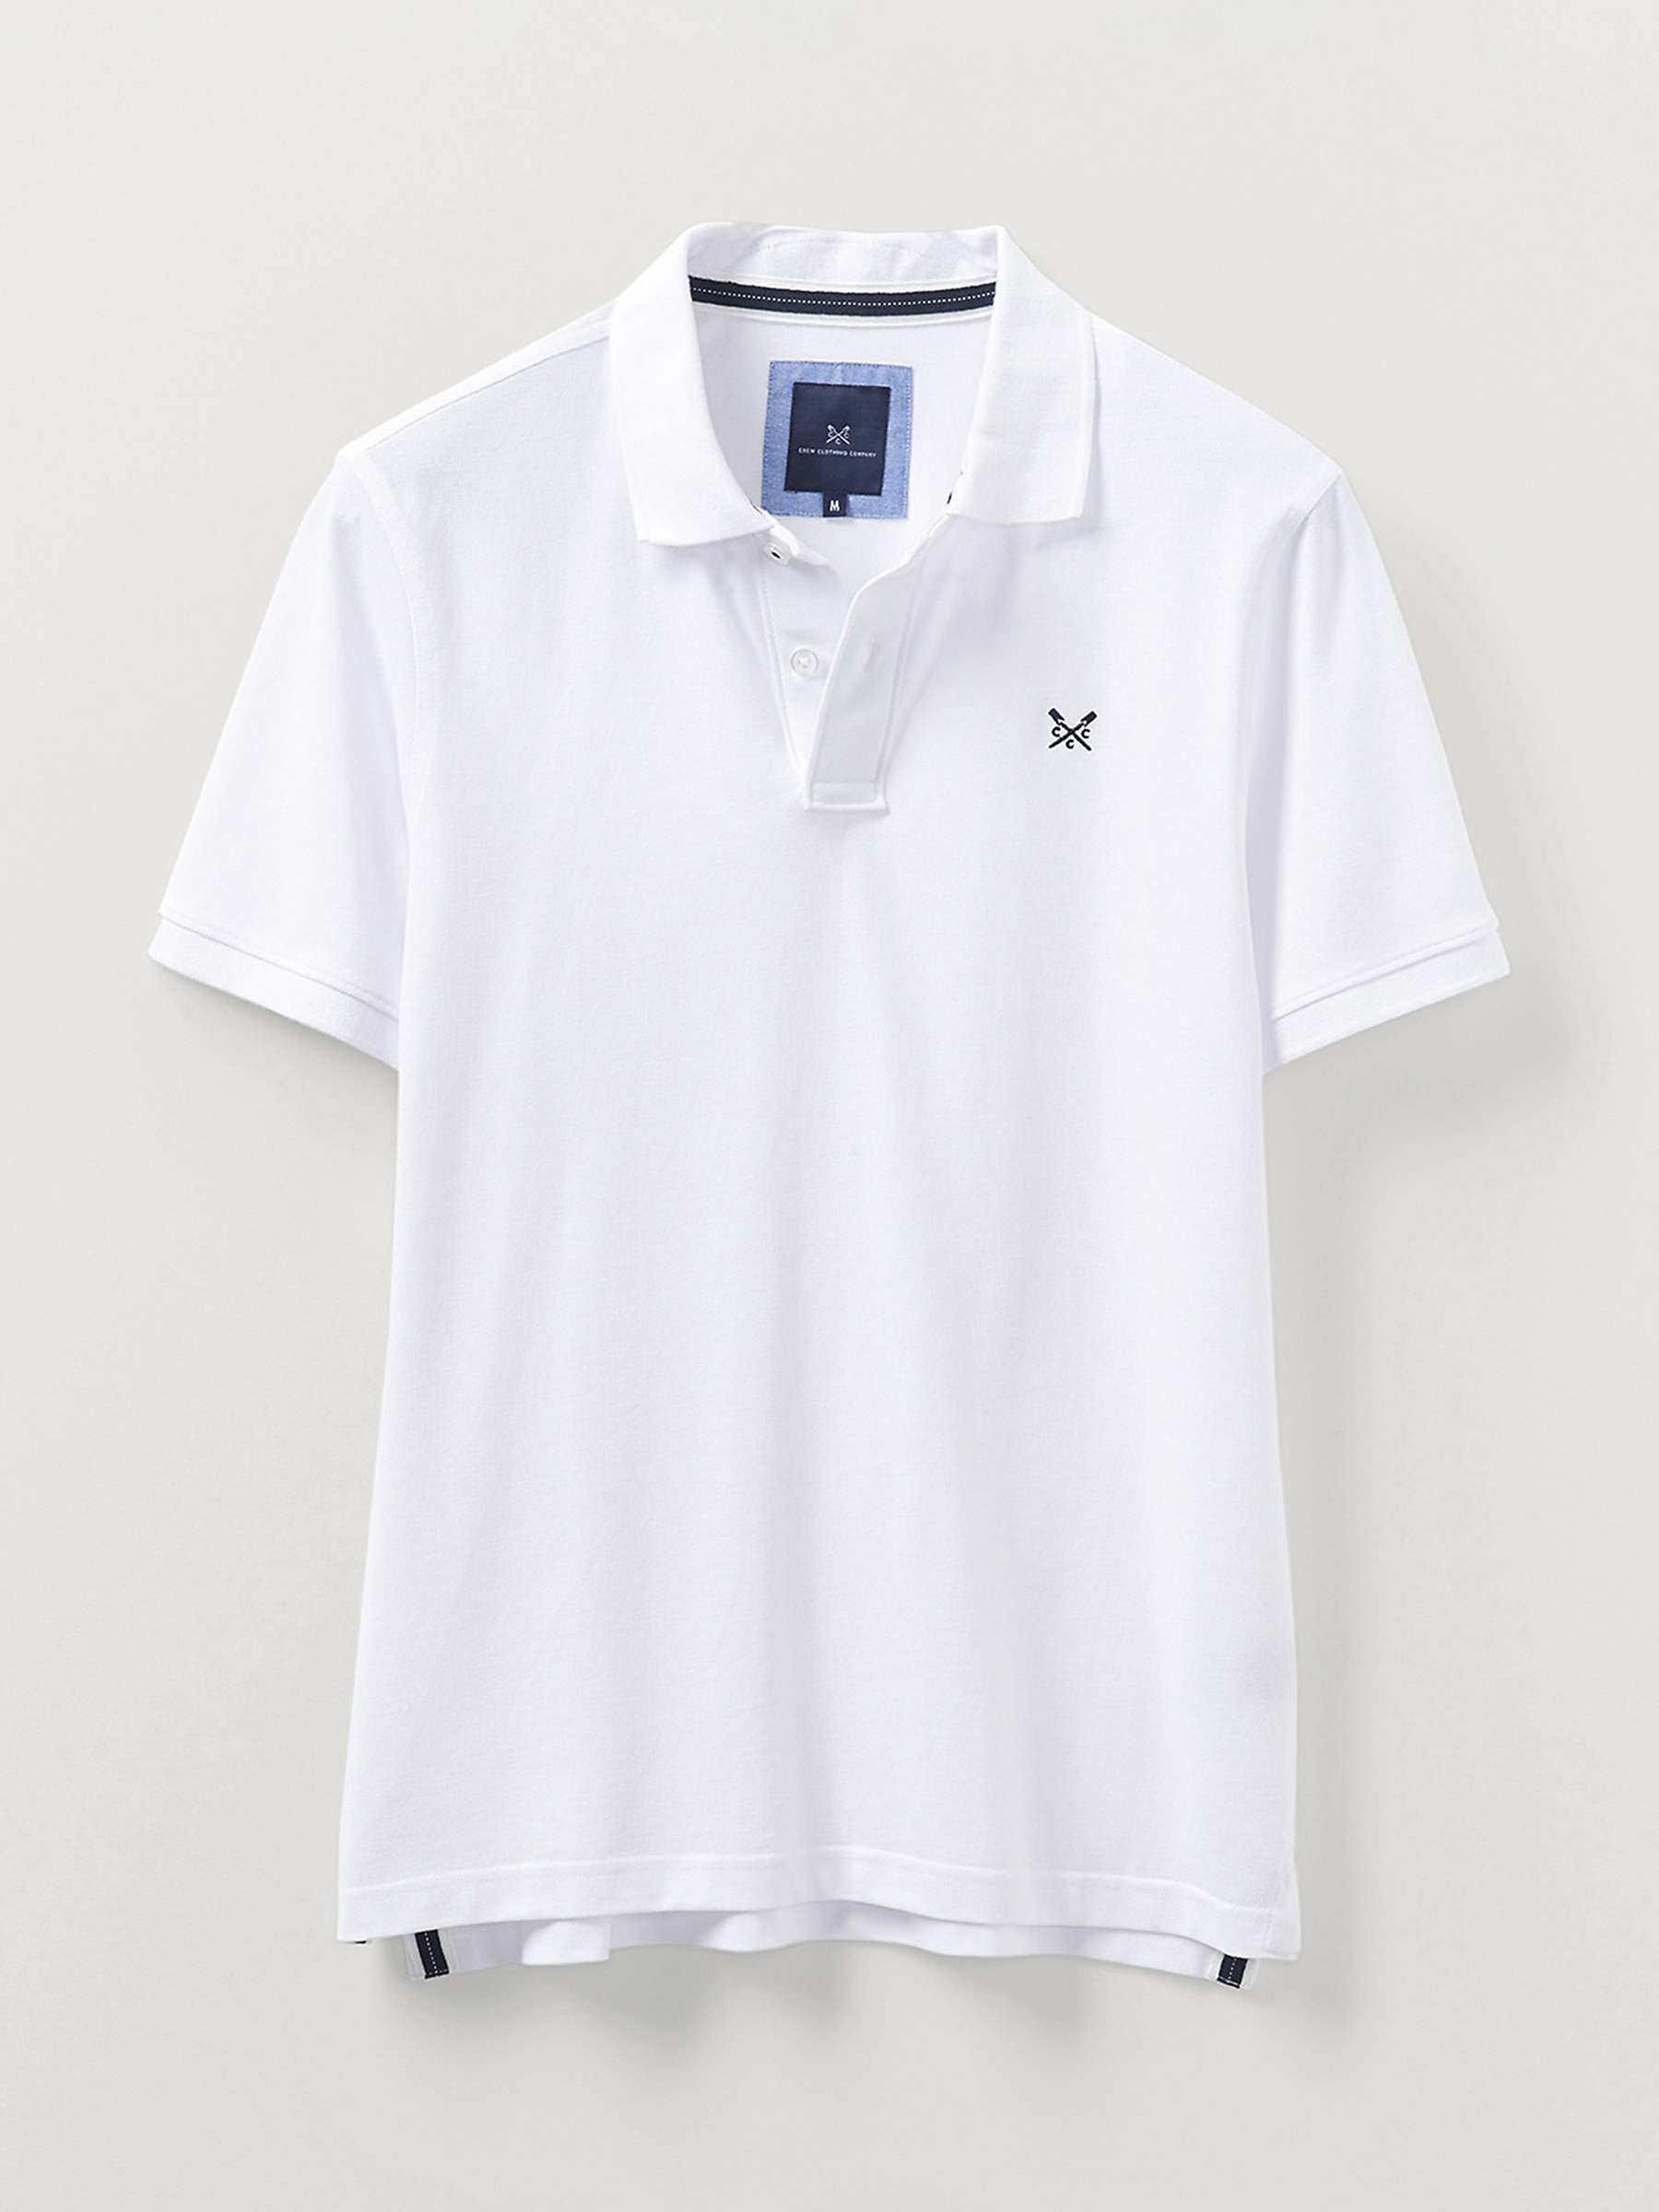 Buy Crew Clothing Classic Pique Polo Shirt Online at johnlewis.com